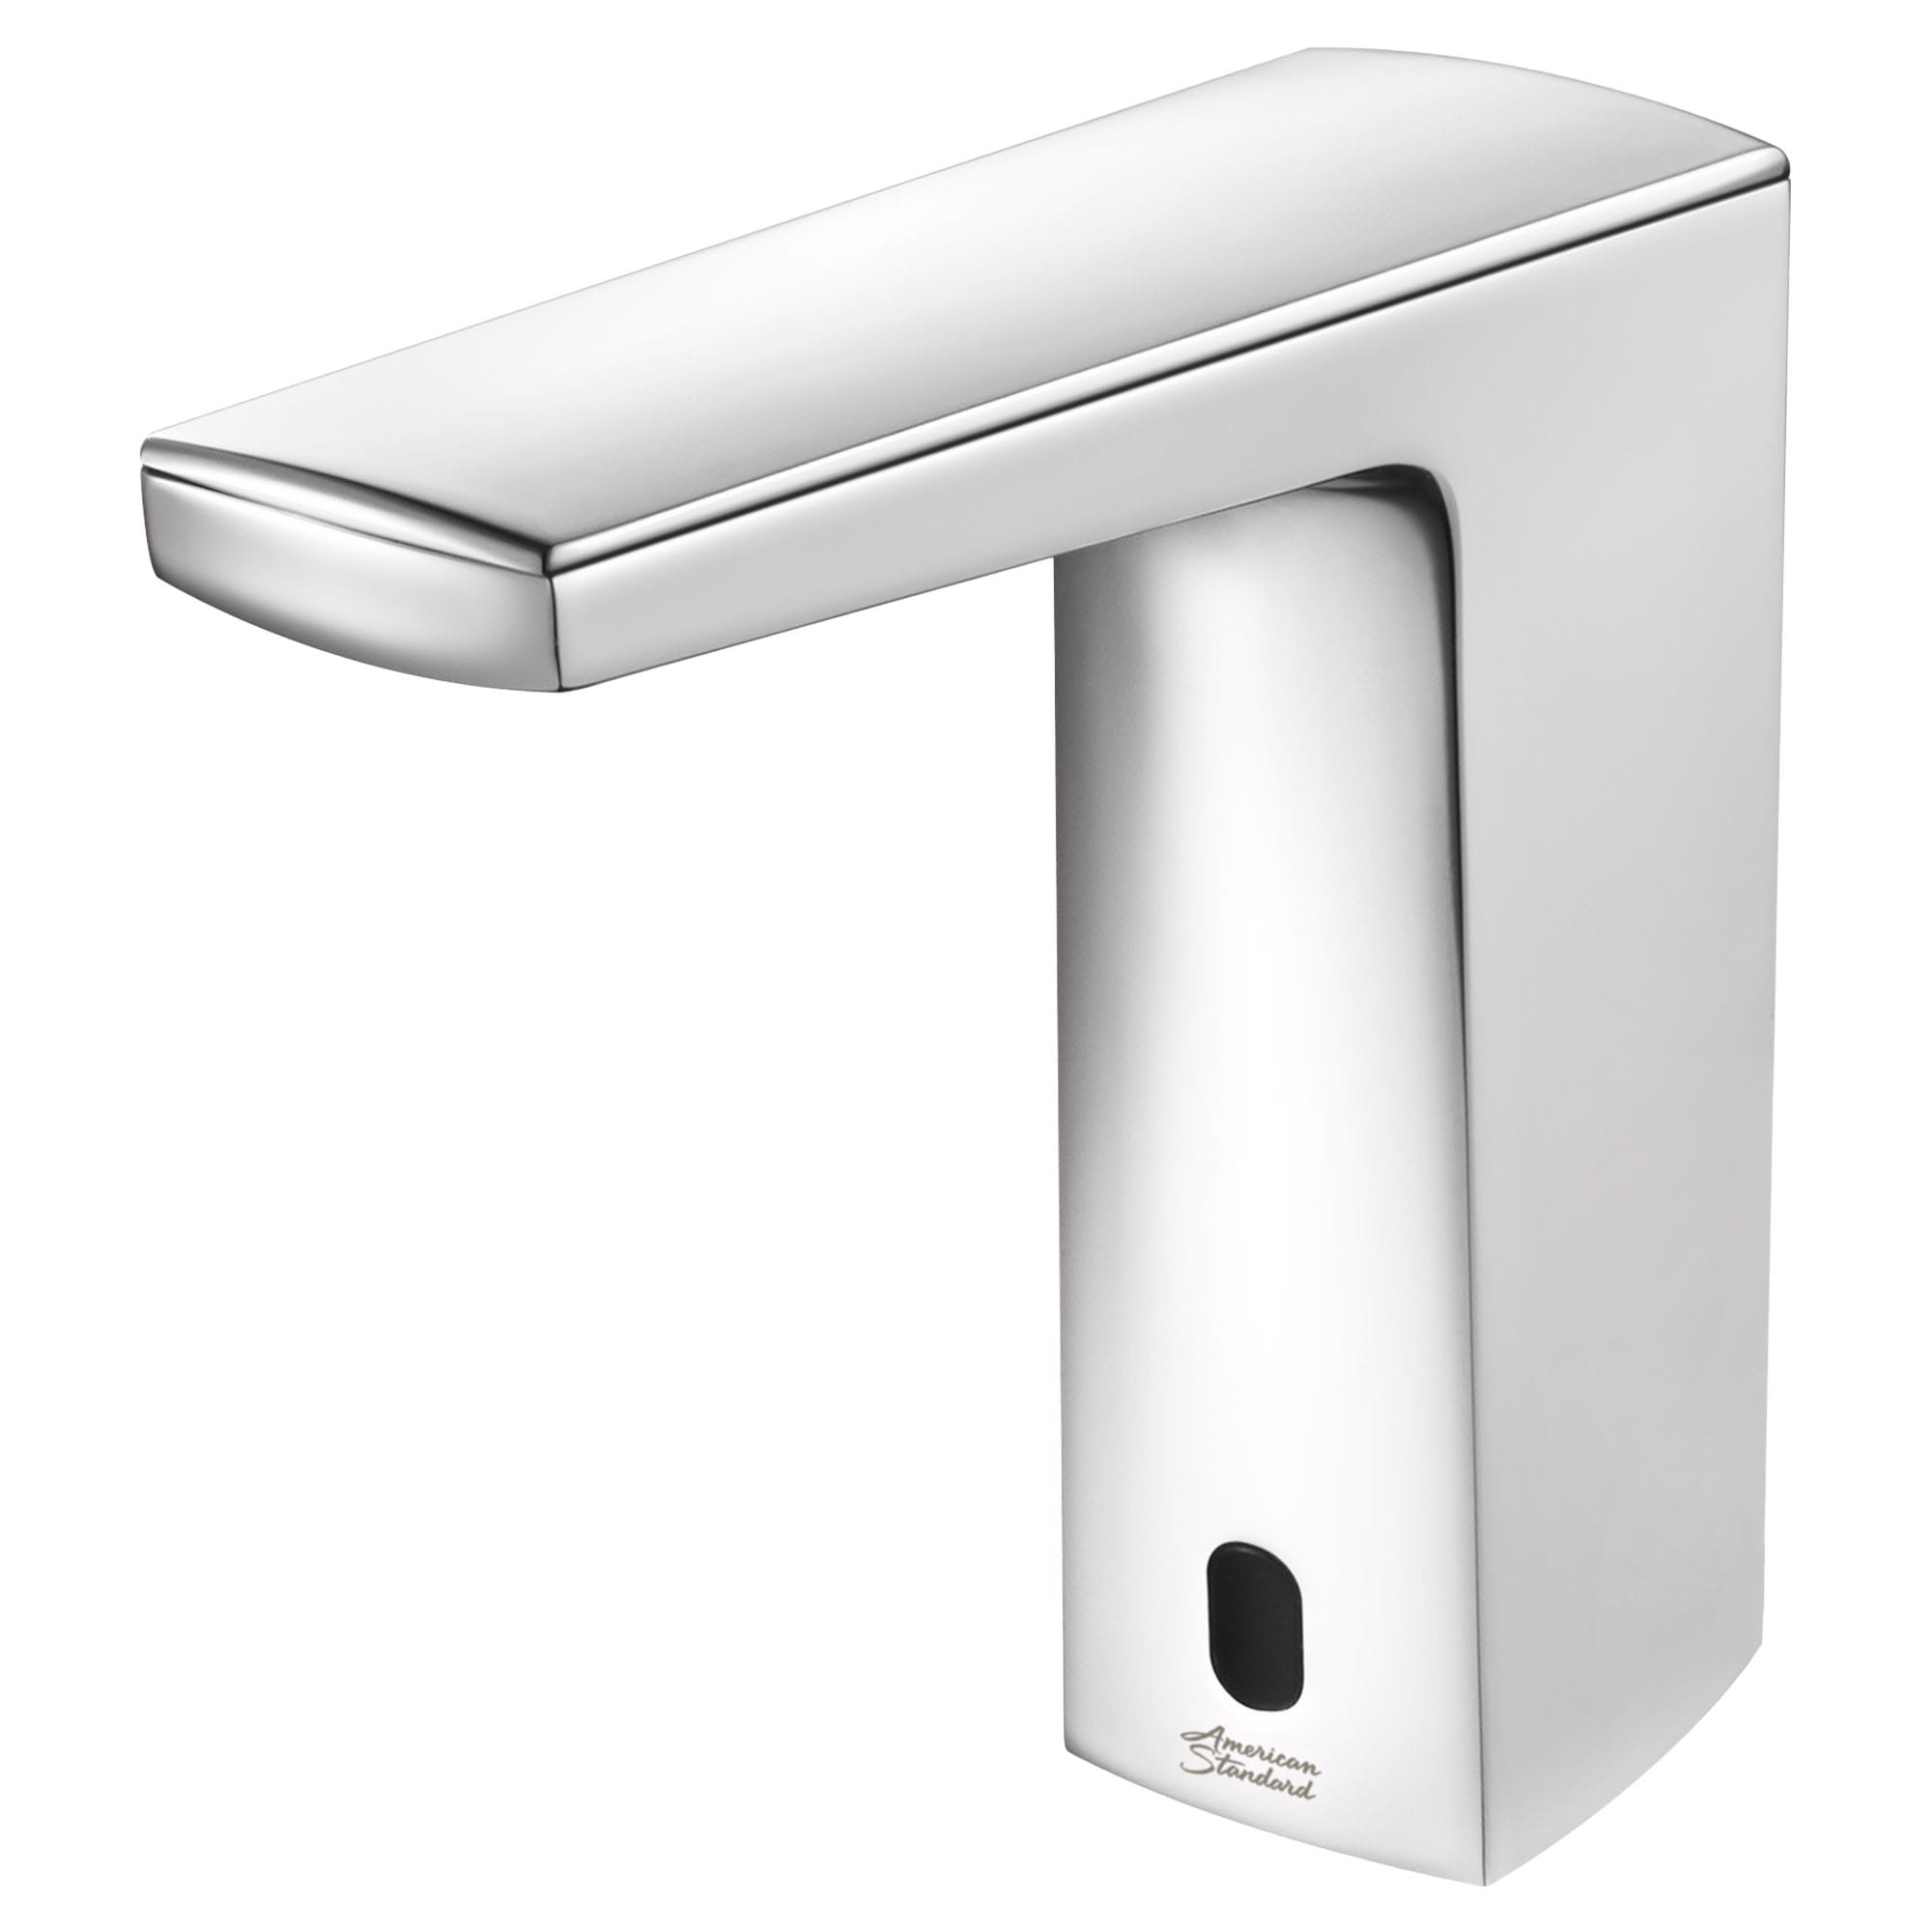 Paradigm® Selectronic® Touchless Faucet, Base Model, 0.5 gpm/1.9 Lpm